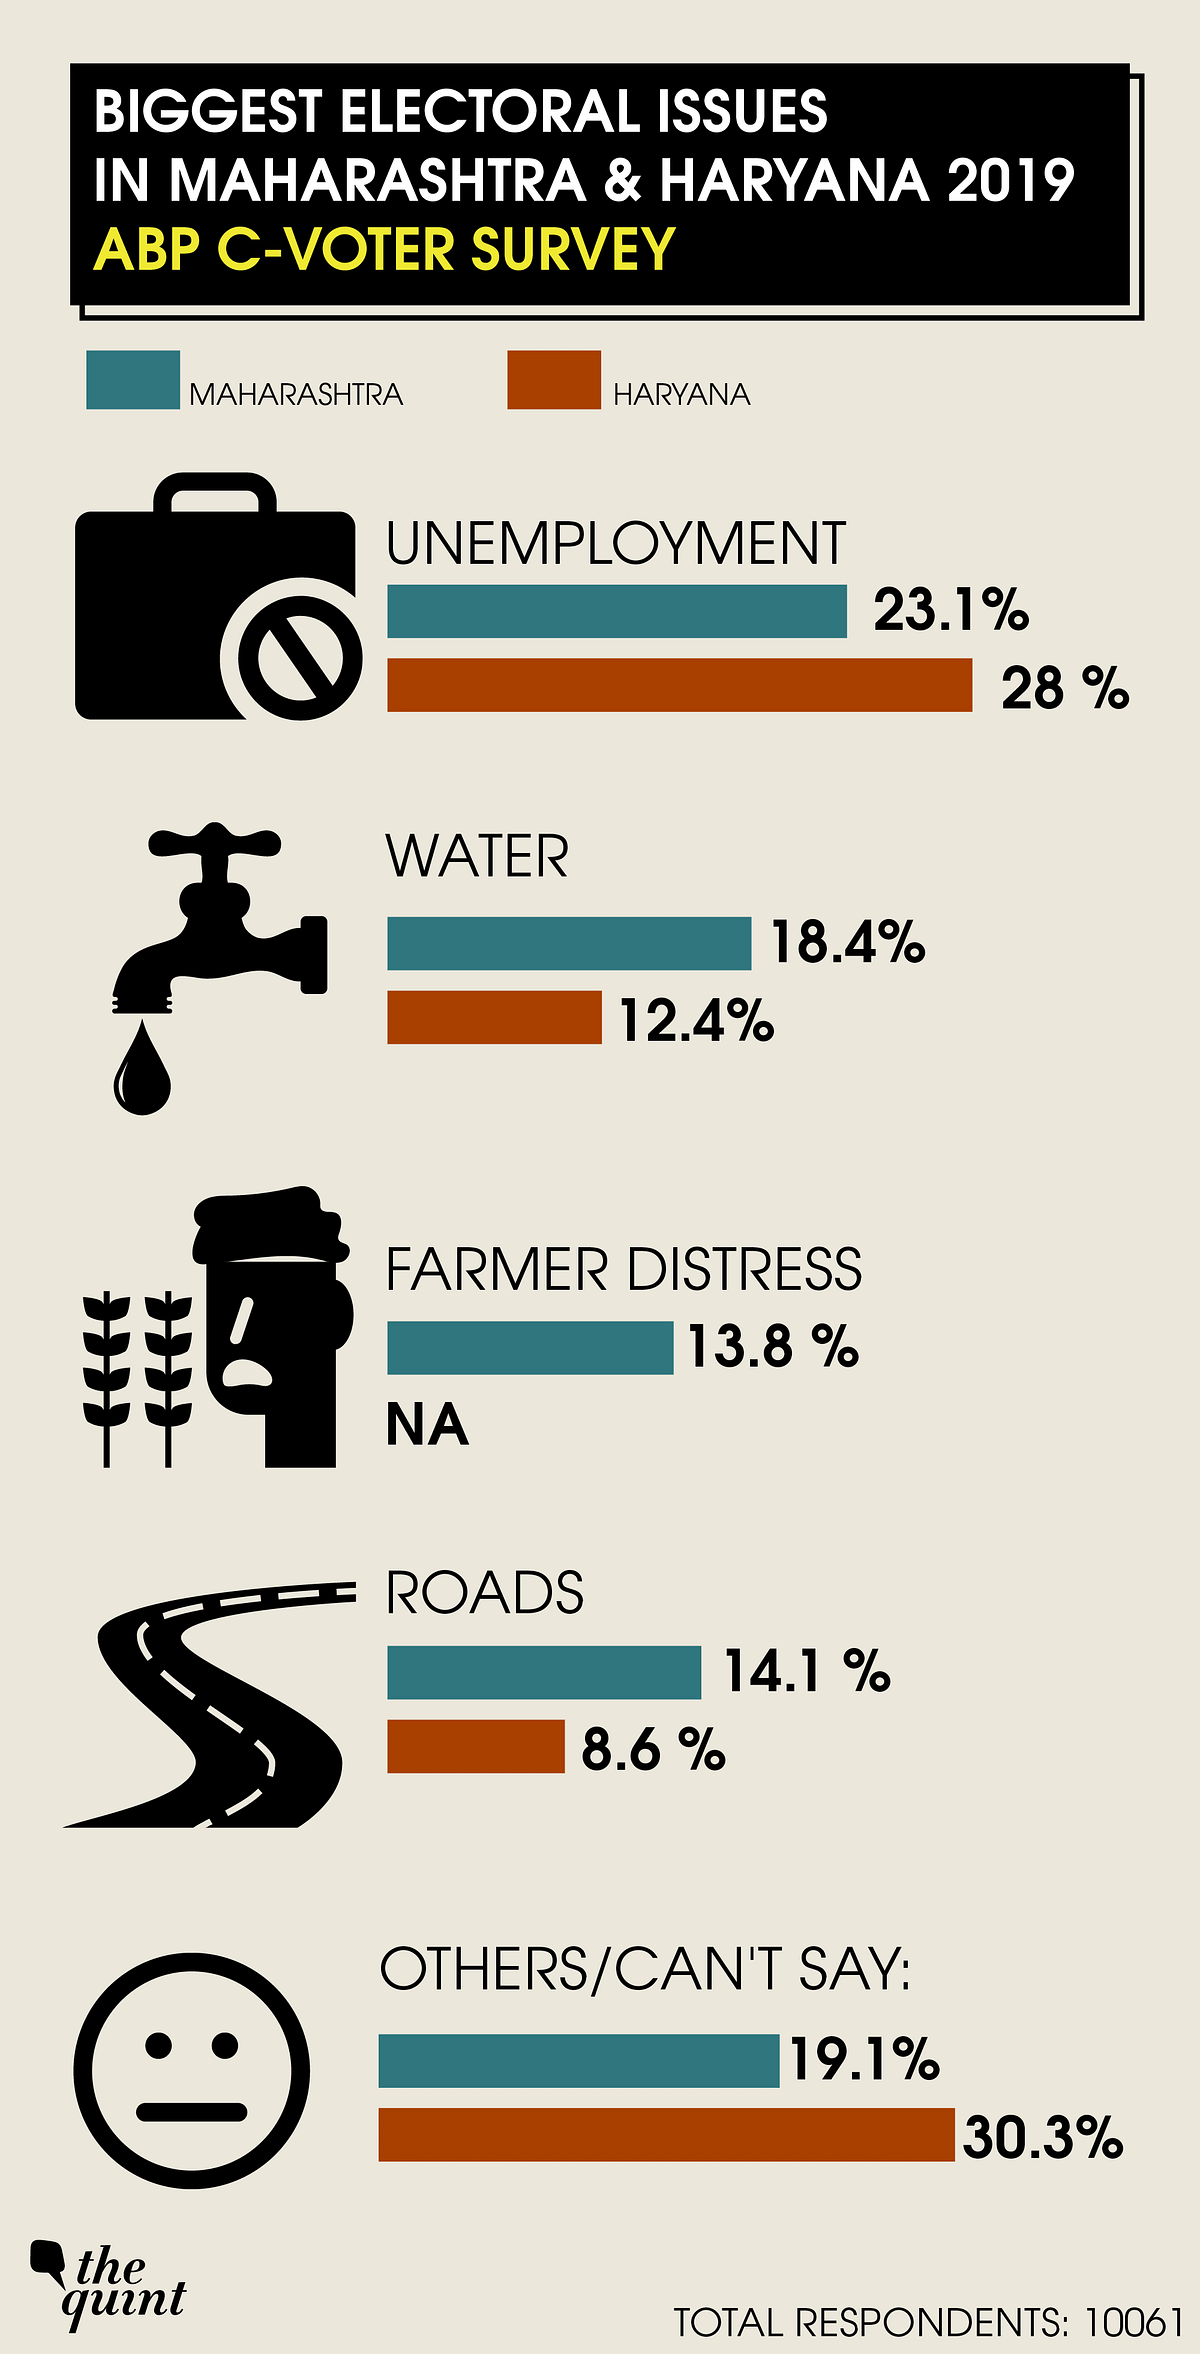 Water issues were voted as the second biggest issue in both states.